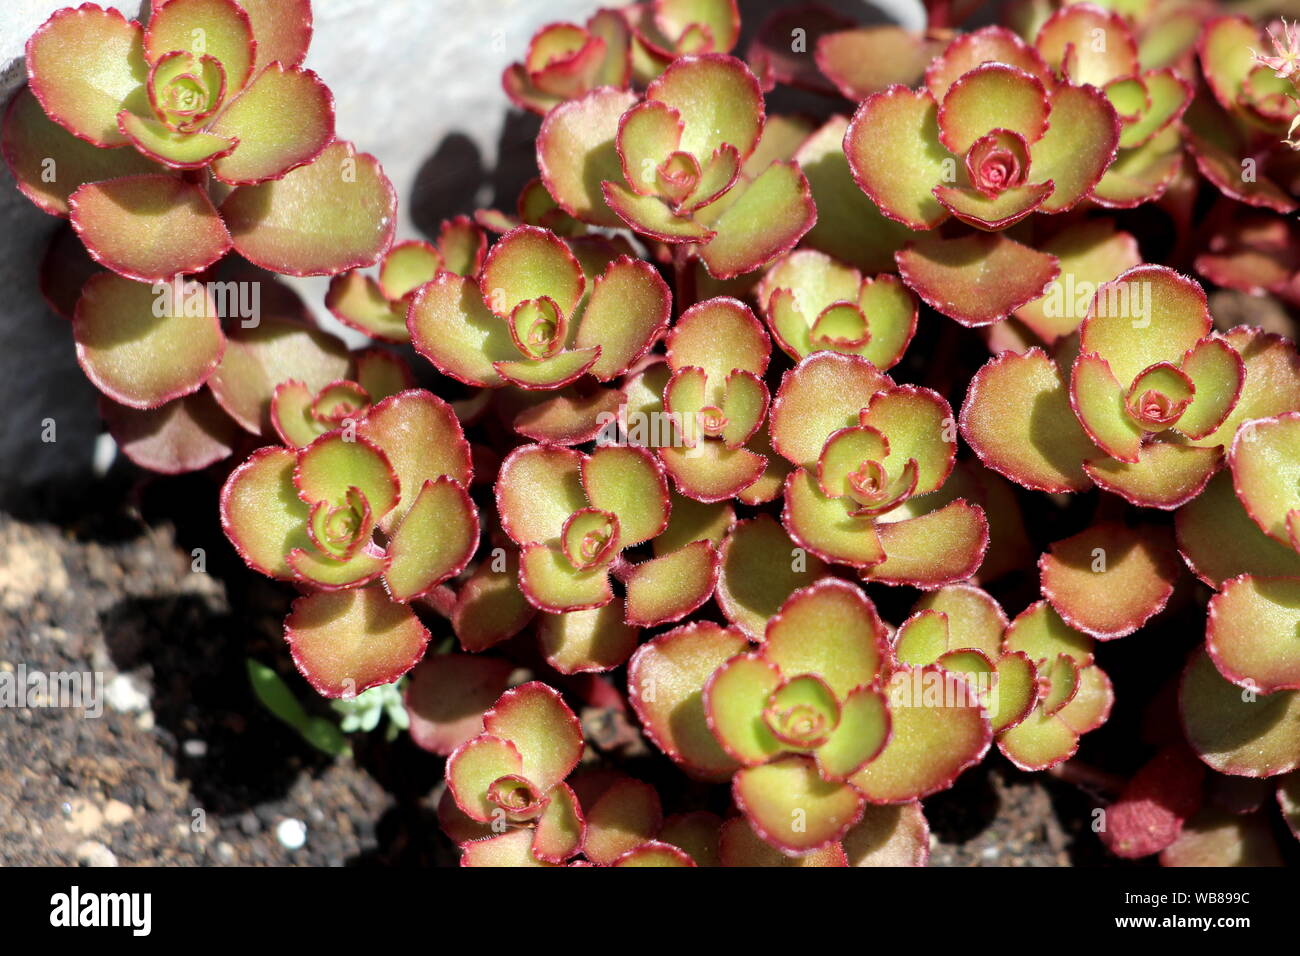 Sedum or Stonecrop hardy succulent ground cover perennial plant with green and dark red edge leaves densely planted in local urban garden Stock Photo